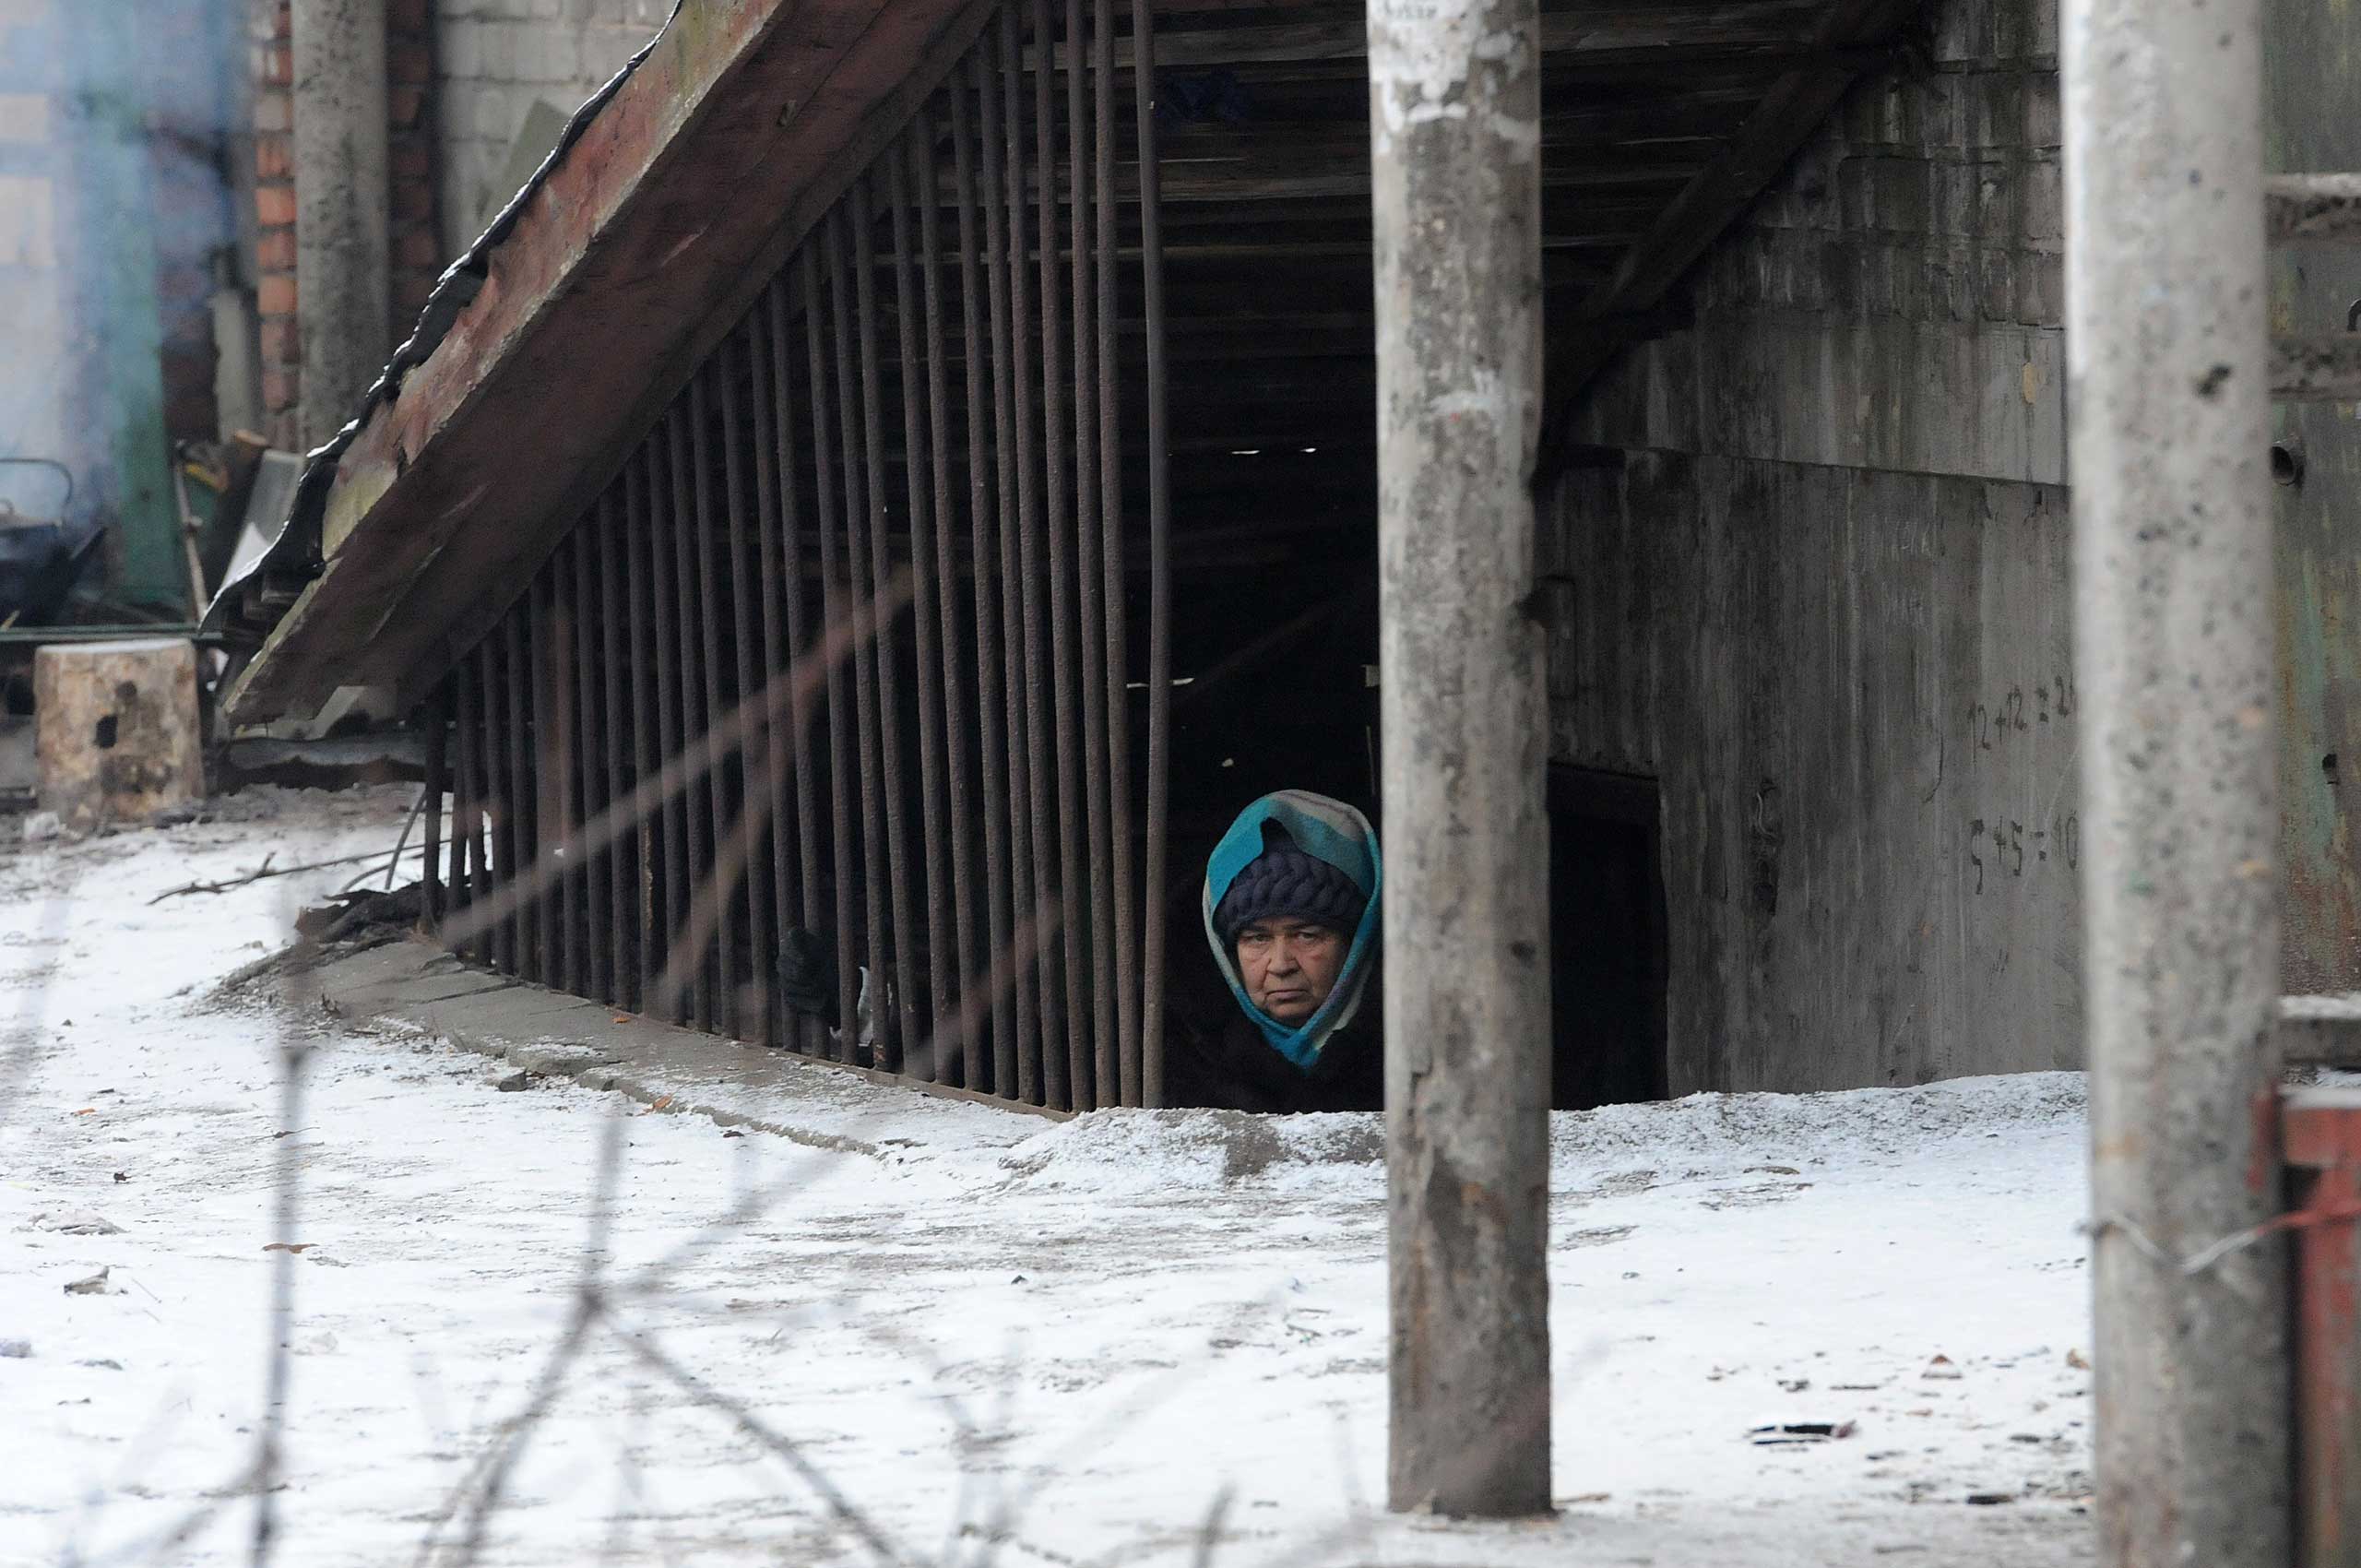 Feb. 9, 2015. A woman takes refuge as her area is under shelling attacks from pro-Russian separatist forces in Debalteve, Donbass Oblast, Ukraine.